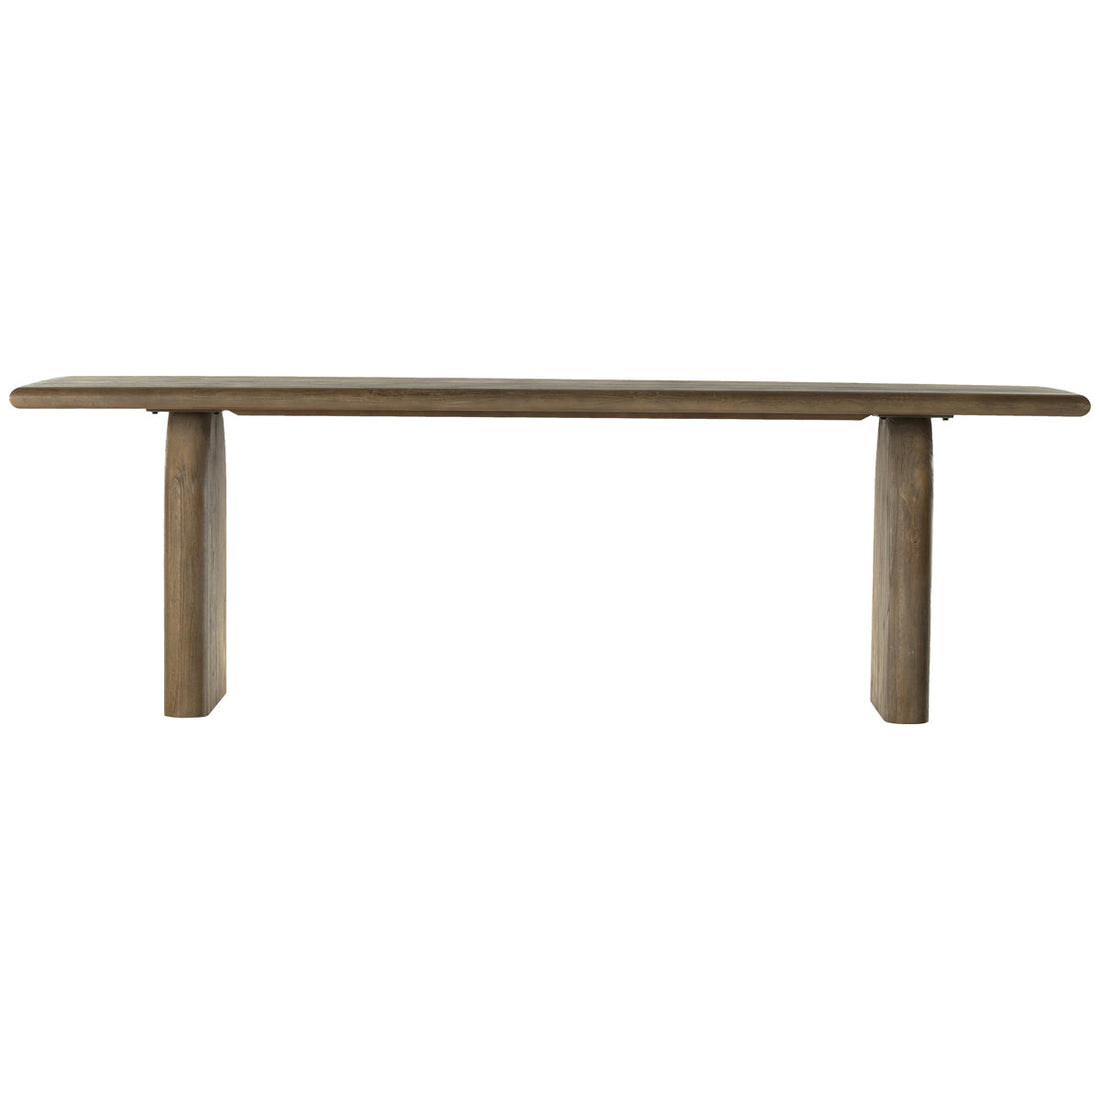 Four Hands Thompson Sorrento 94-Inch Dining Table - Aged Drift